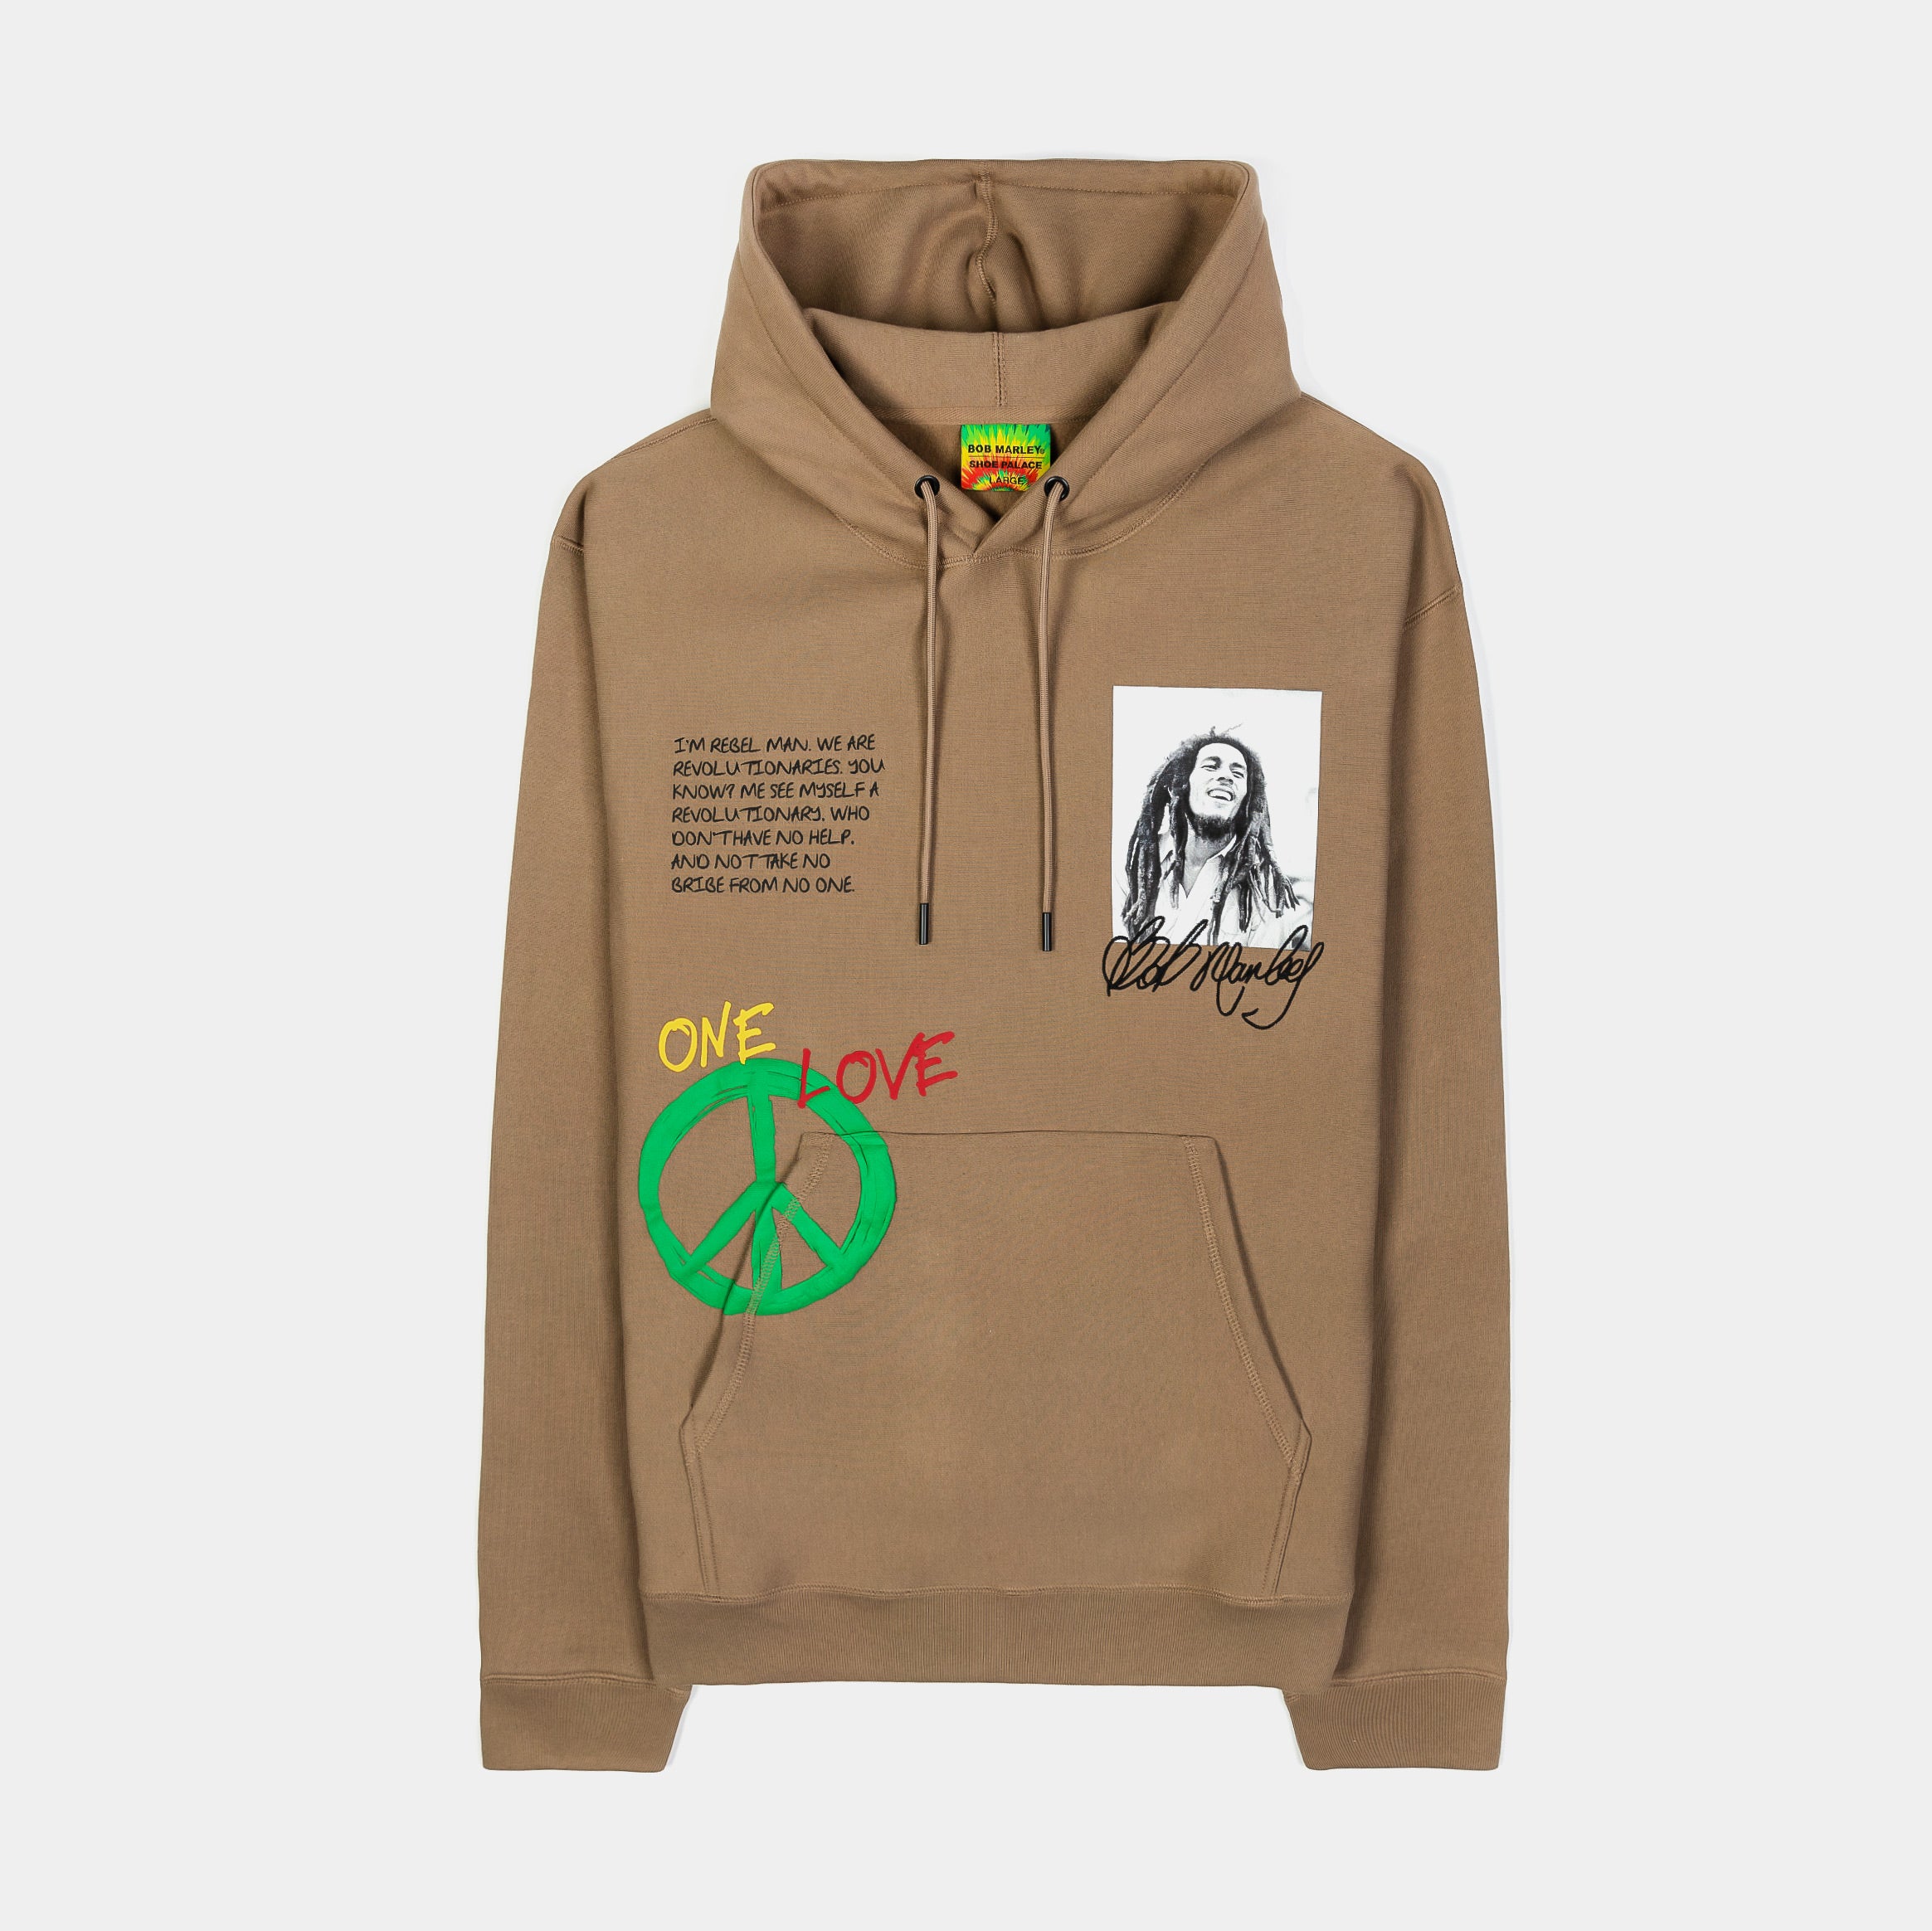 SP x Bob Marley Montage Pullover Mens Hoodie (Taupe/Green)